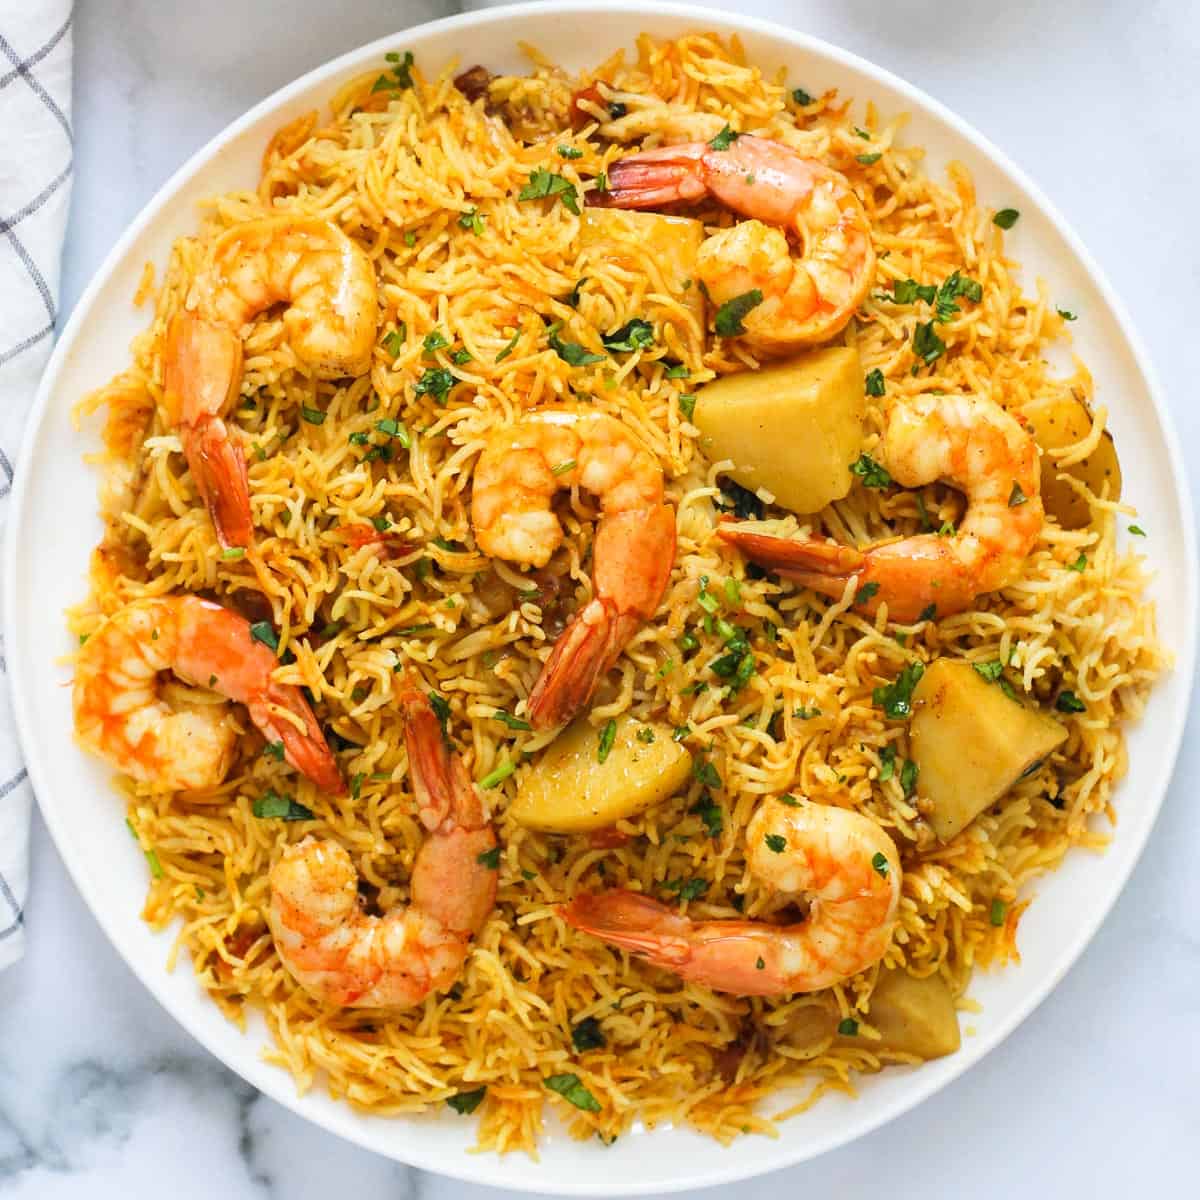 Shrimp Biryani with potatoes served in a large platter.